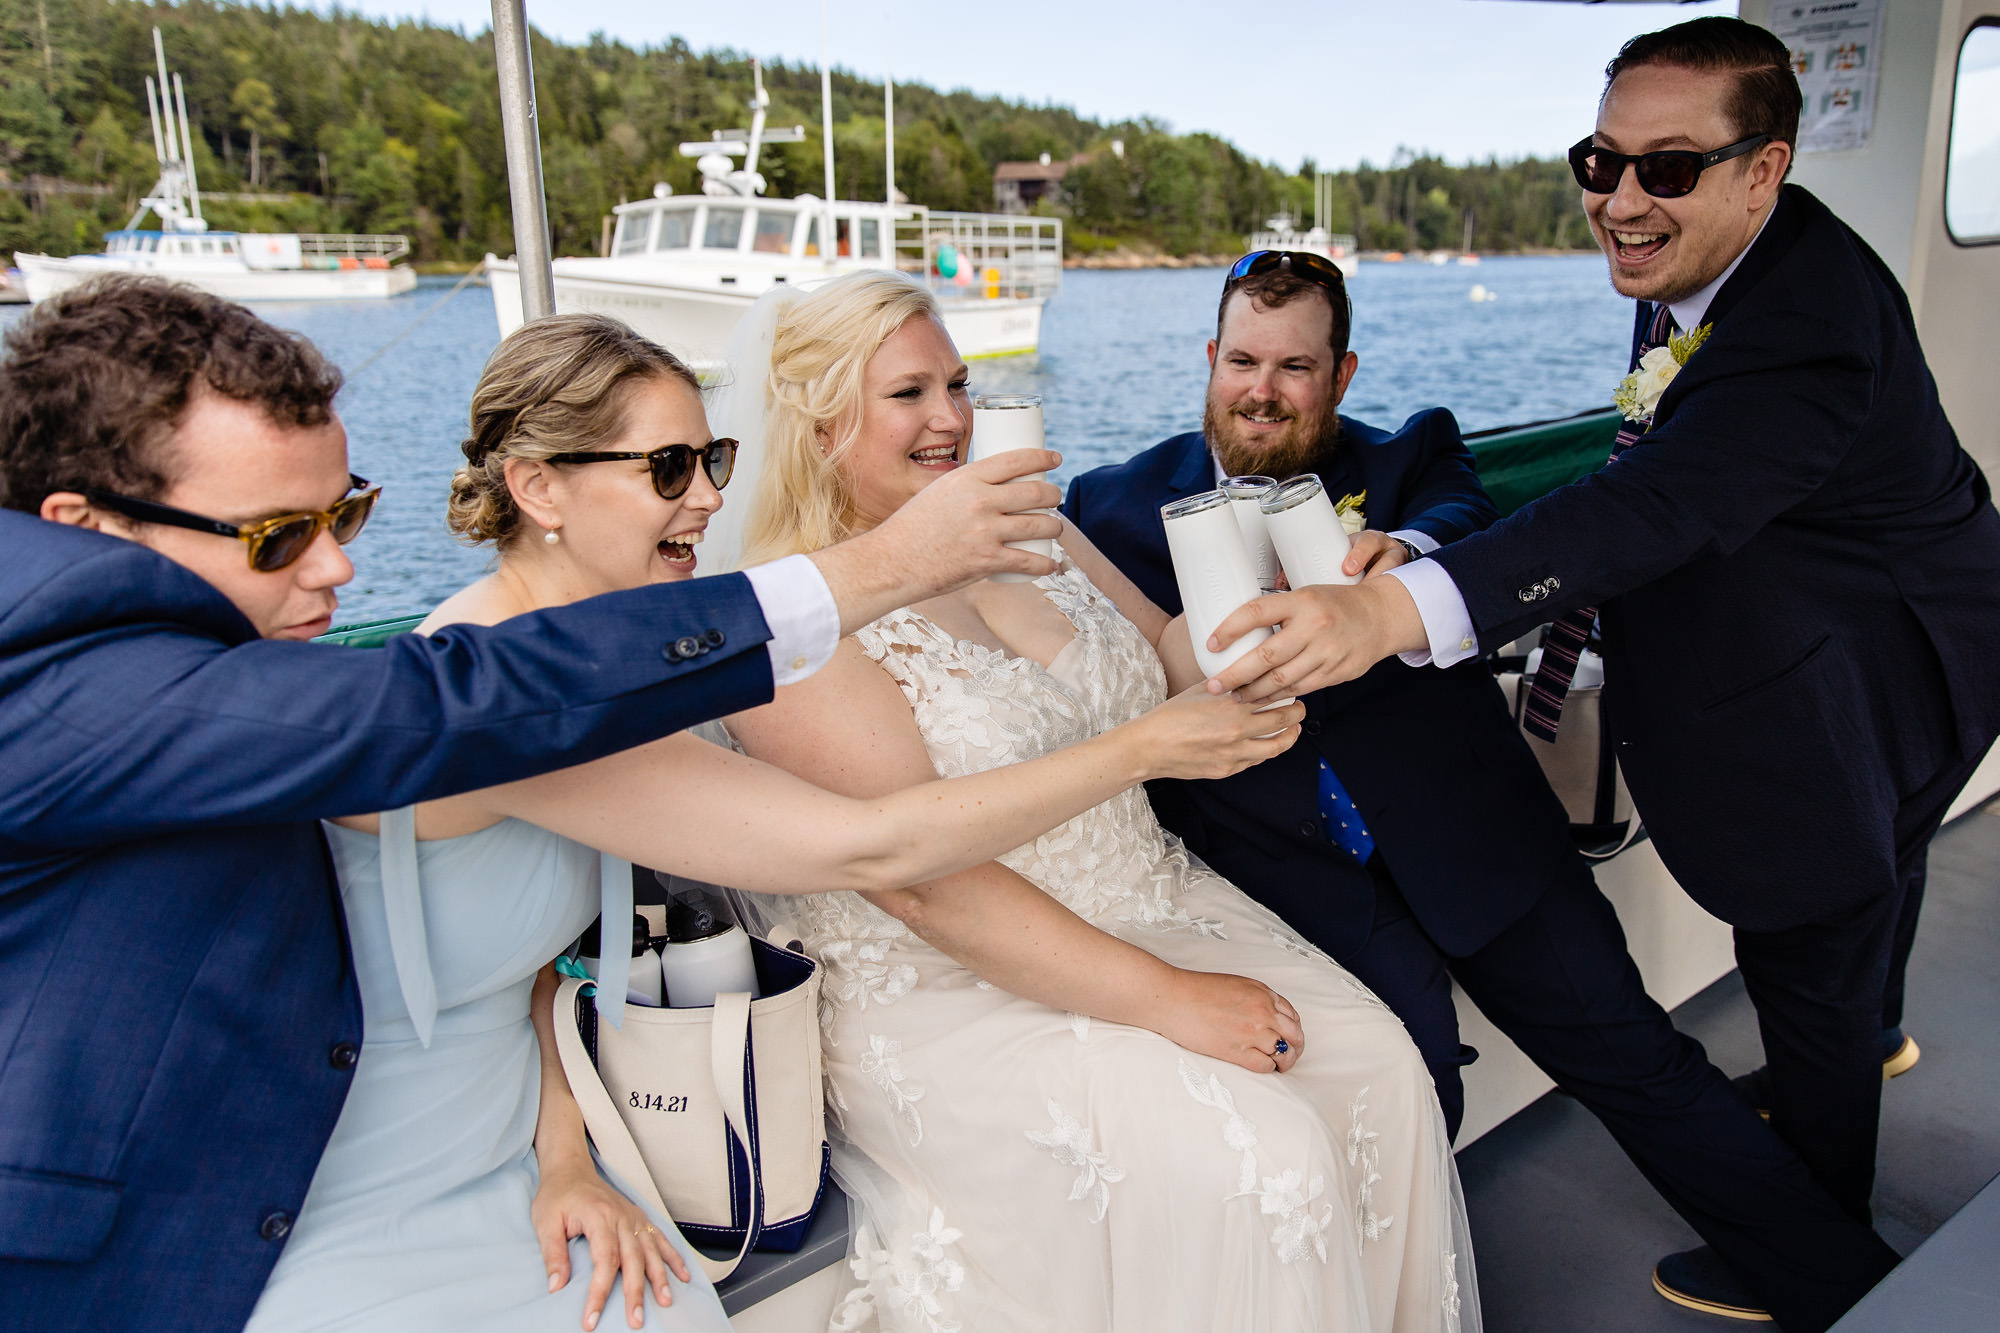 A wedding celebration on a boat after the wedding ceremony on MDI Maine